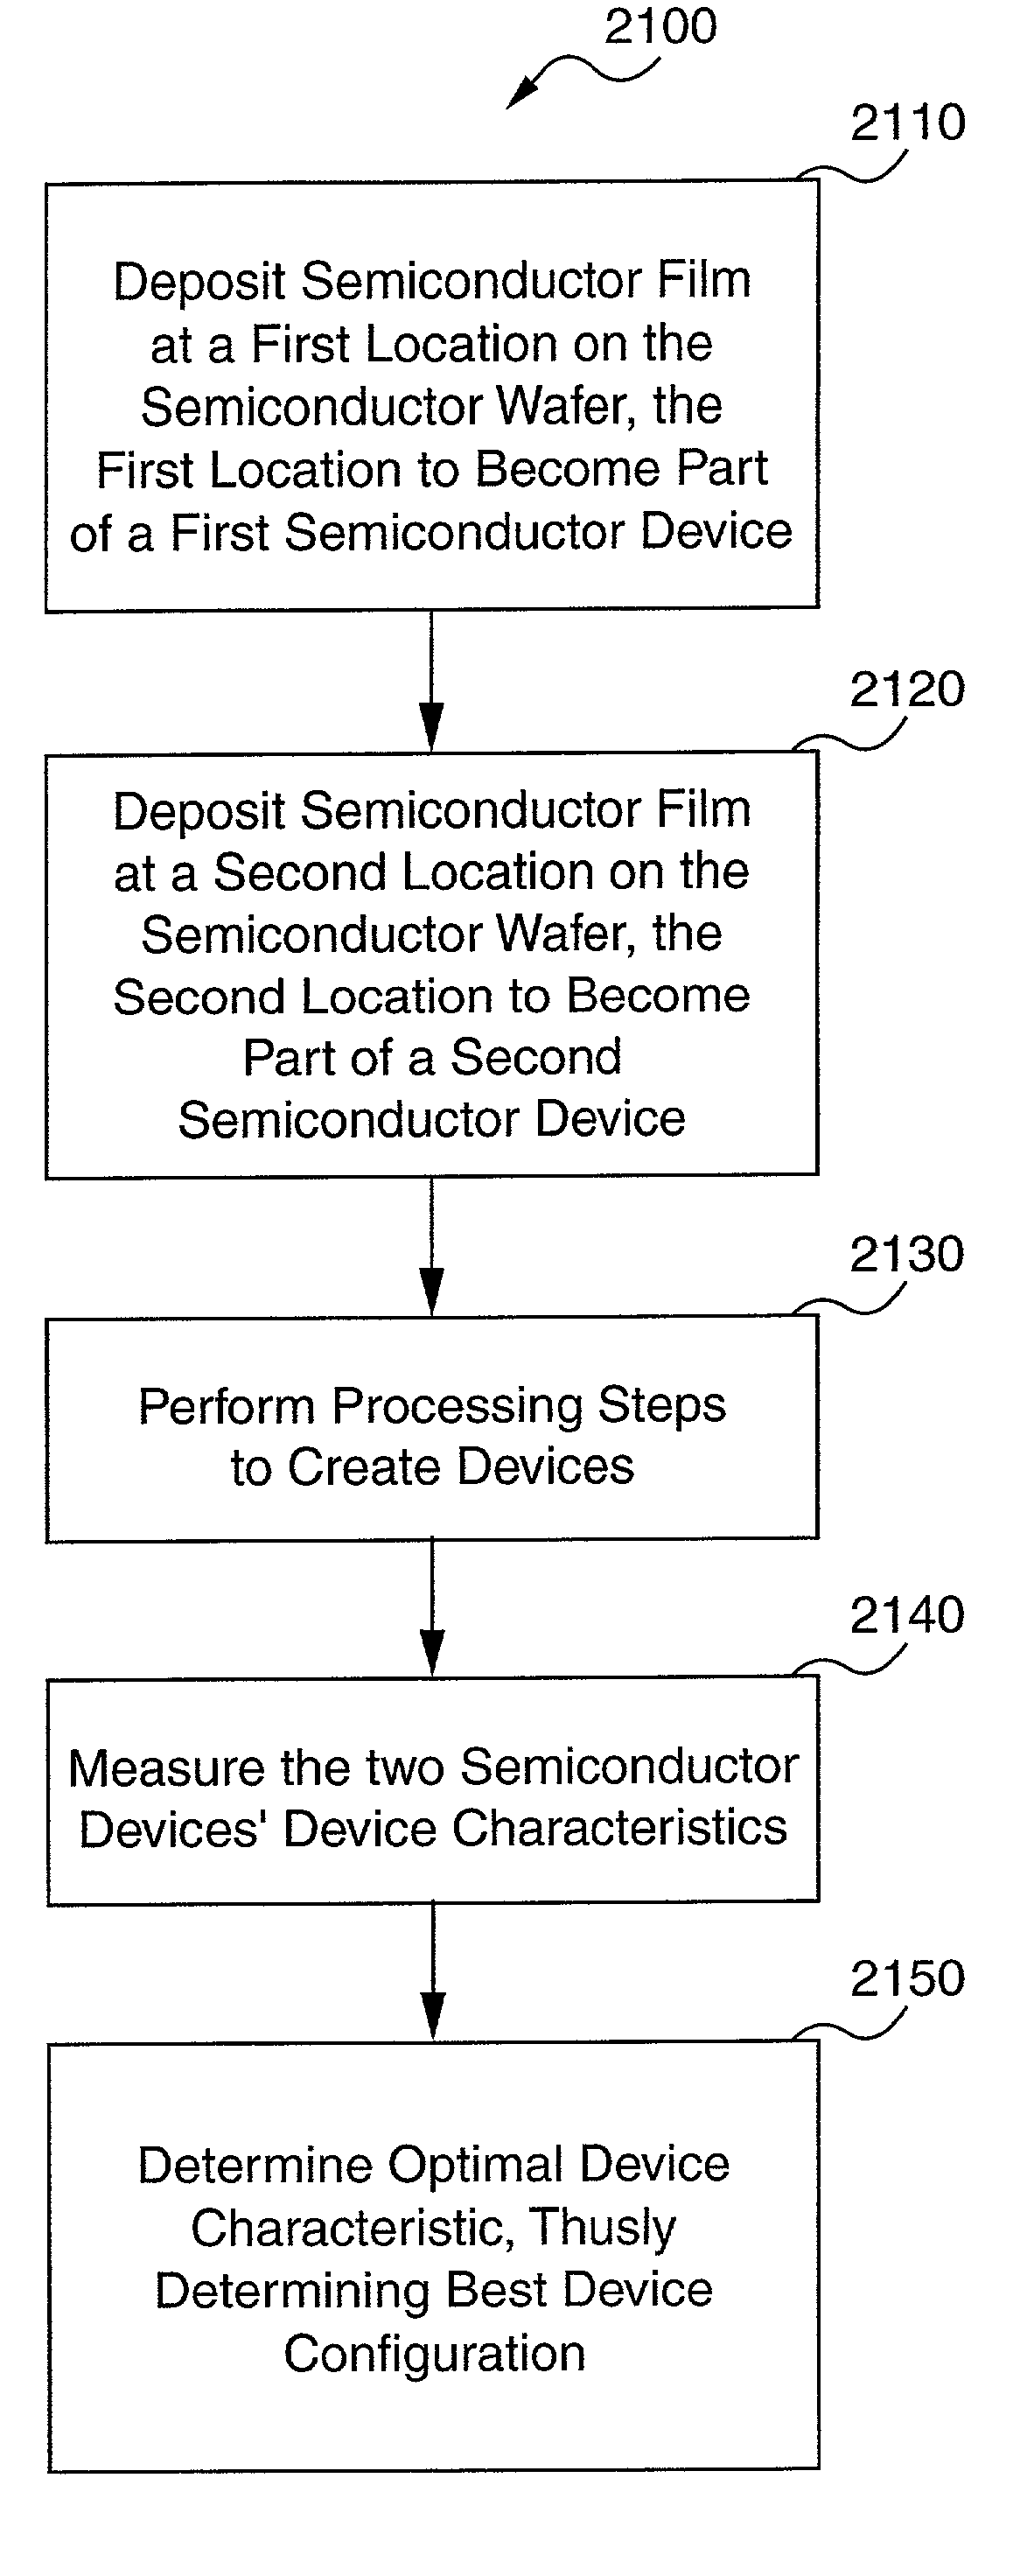 Deliberate semiconductor film variation to compensate for radial processing differences, determine optimal device characteristics, or produce small production runs